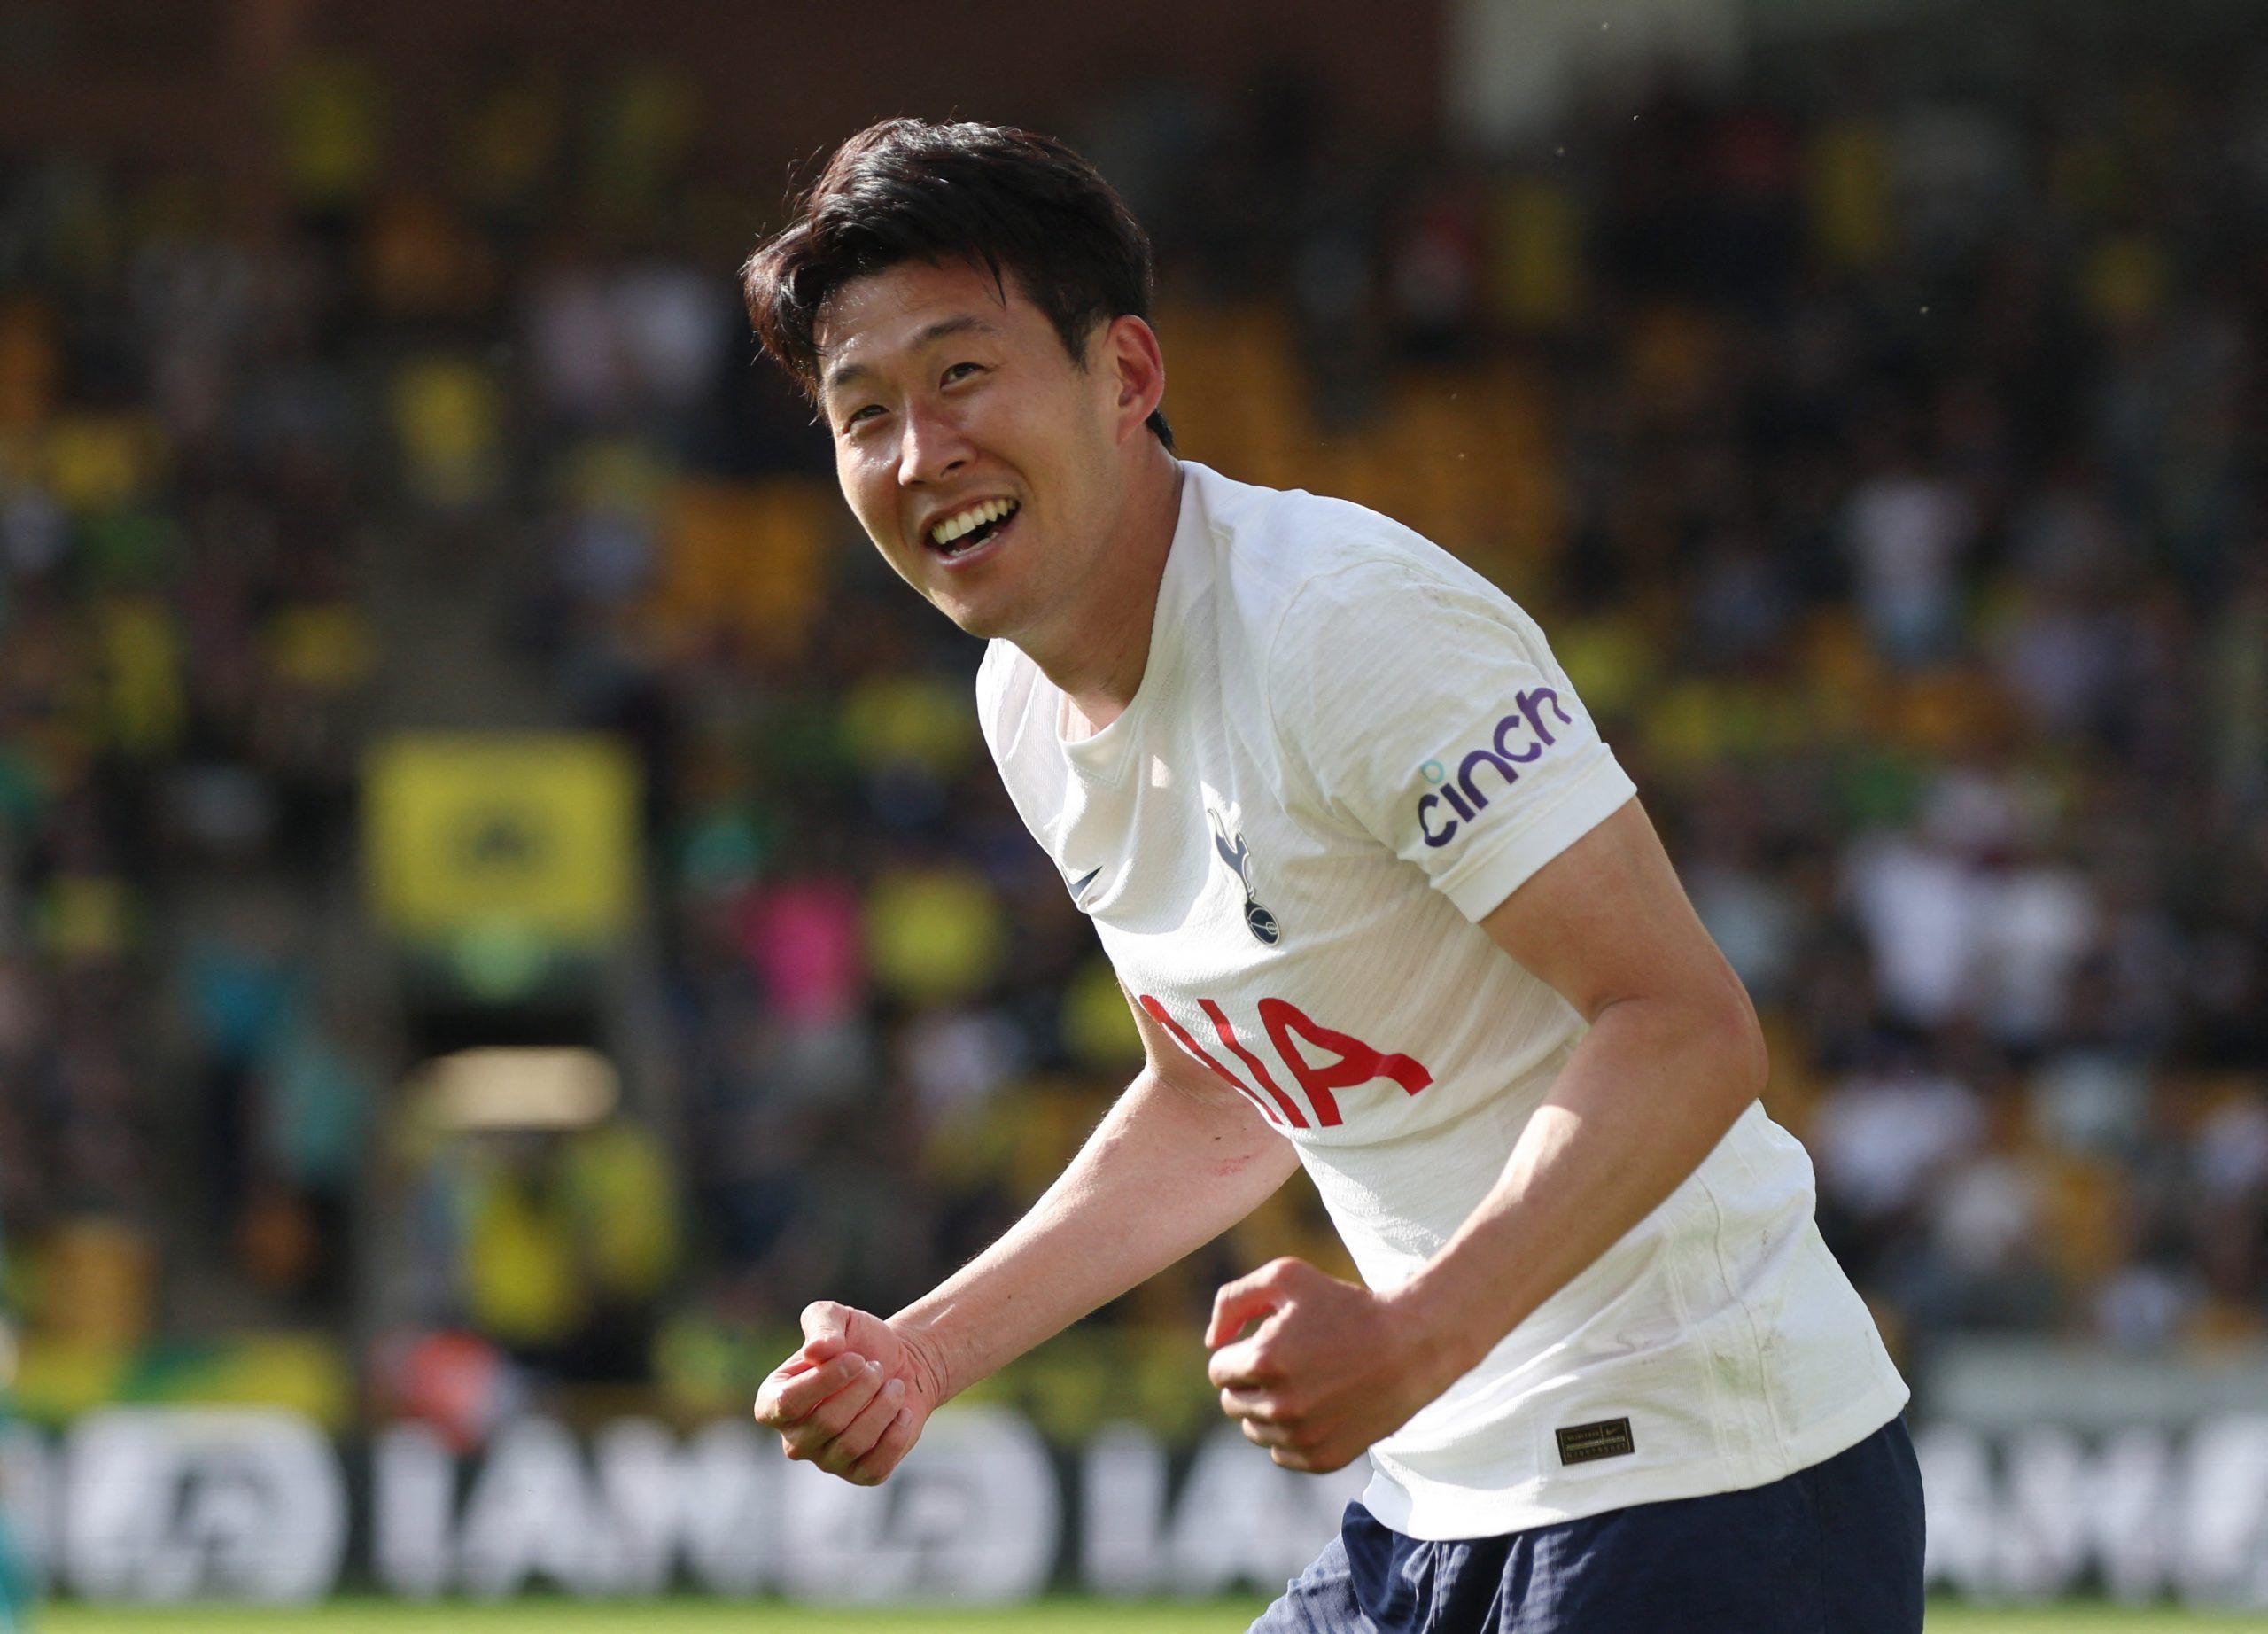 Soccer Football - Premier League - Norwich City v Tottenham Hotspur - Carrow Road, Norwich, Britain - May 22, 2022 Tottenham Hotspur's Son Heung-min celebrates scoring their fifth goal Action Images via Reuters/Paul Childs EDITORIAL USE ONLY. No use with unauthorized audio, video, data, fixture lists, club/league logos or 'live' services. Online in-match use limited to 75 images, no video emulation. No use in betting, games or single club /league/player publications.  Please contact your account